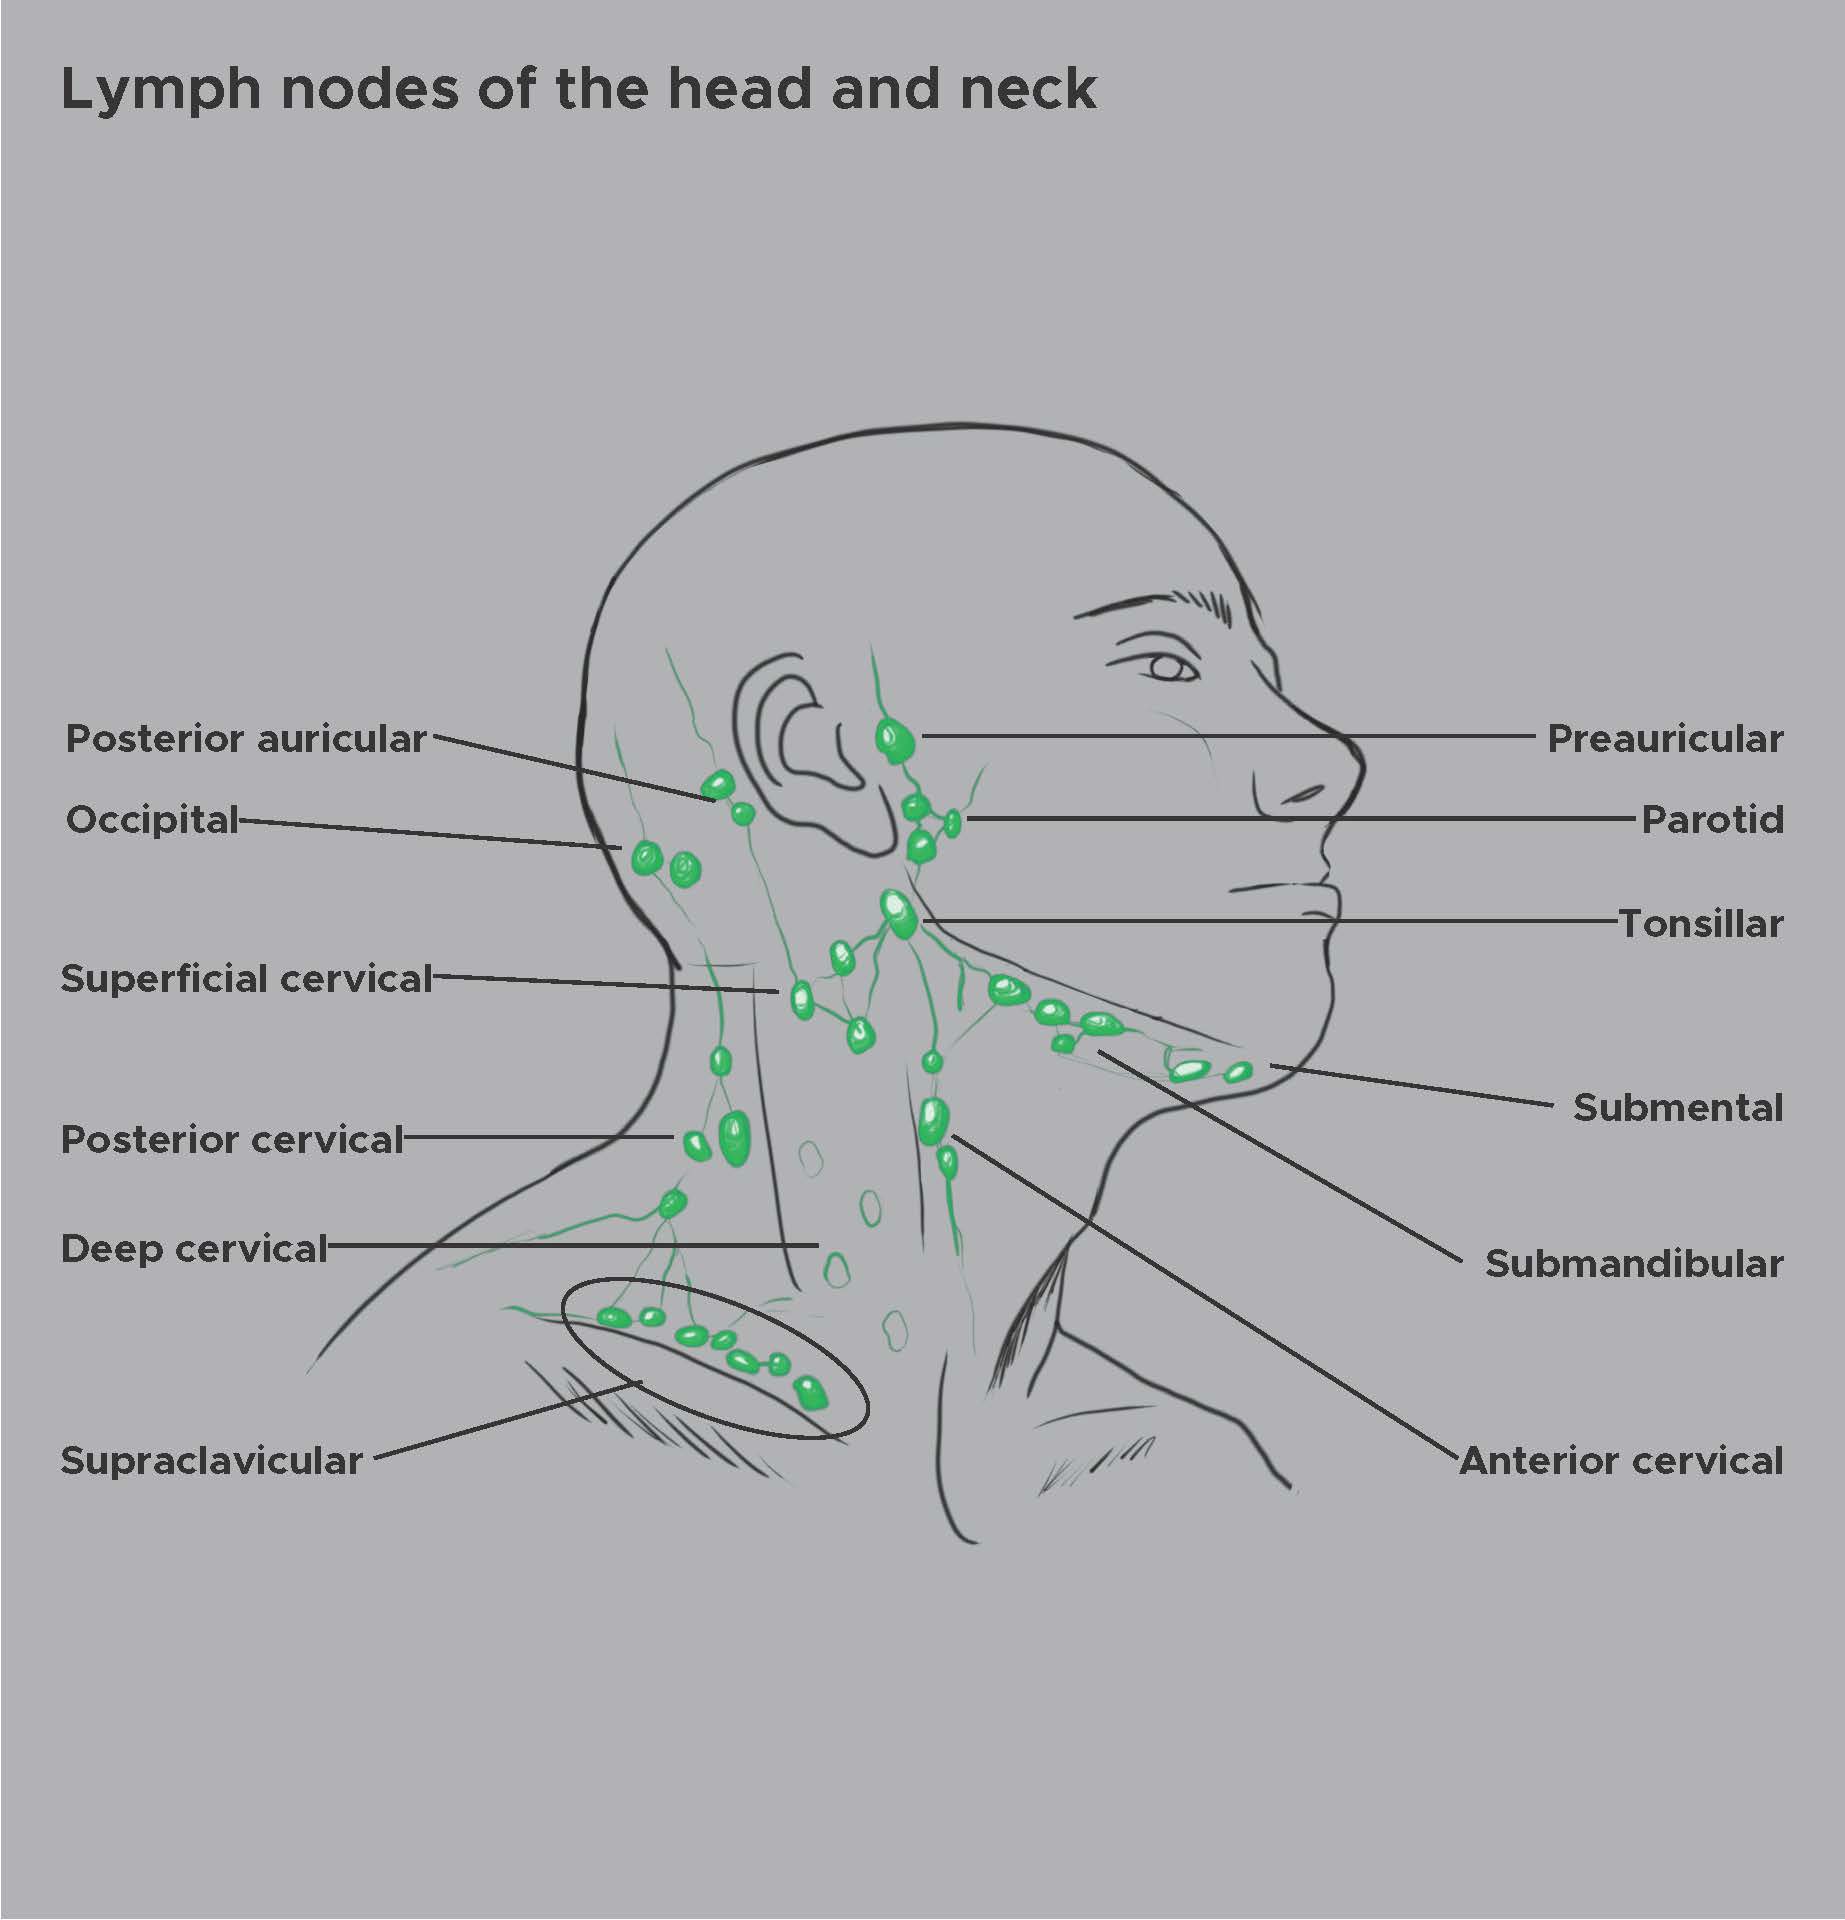 <p>Lymph Nodes of the Head and Neck</p>